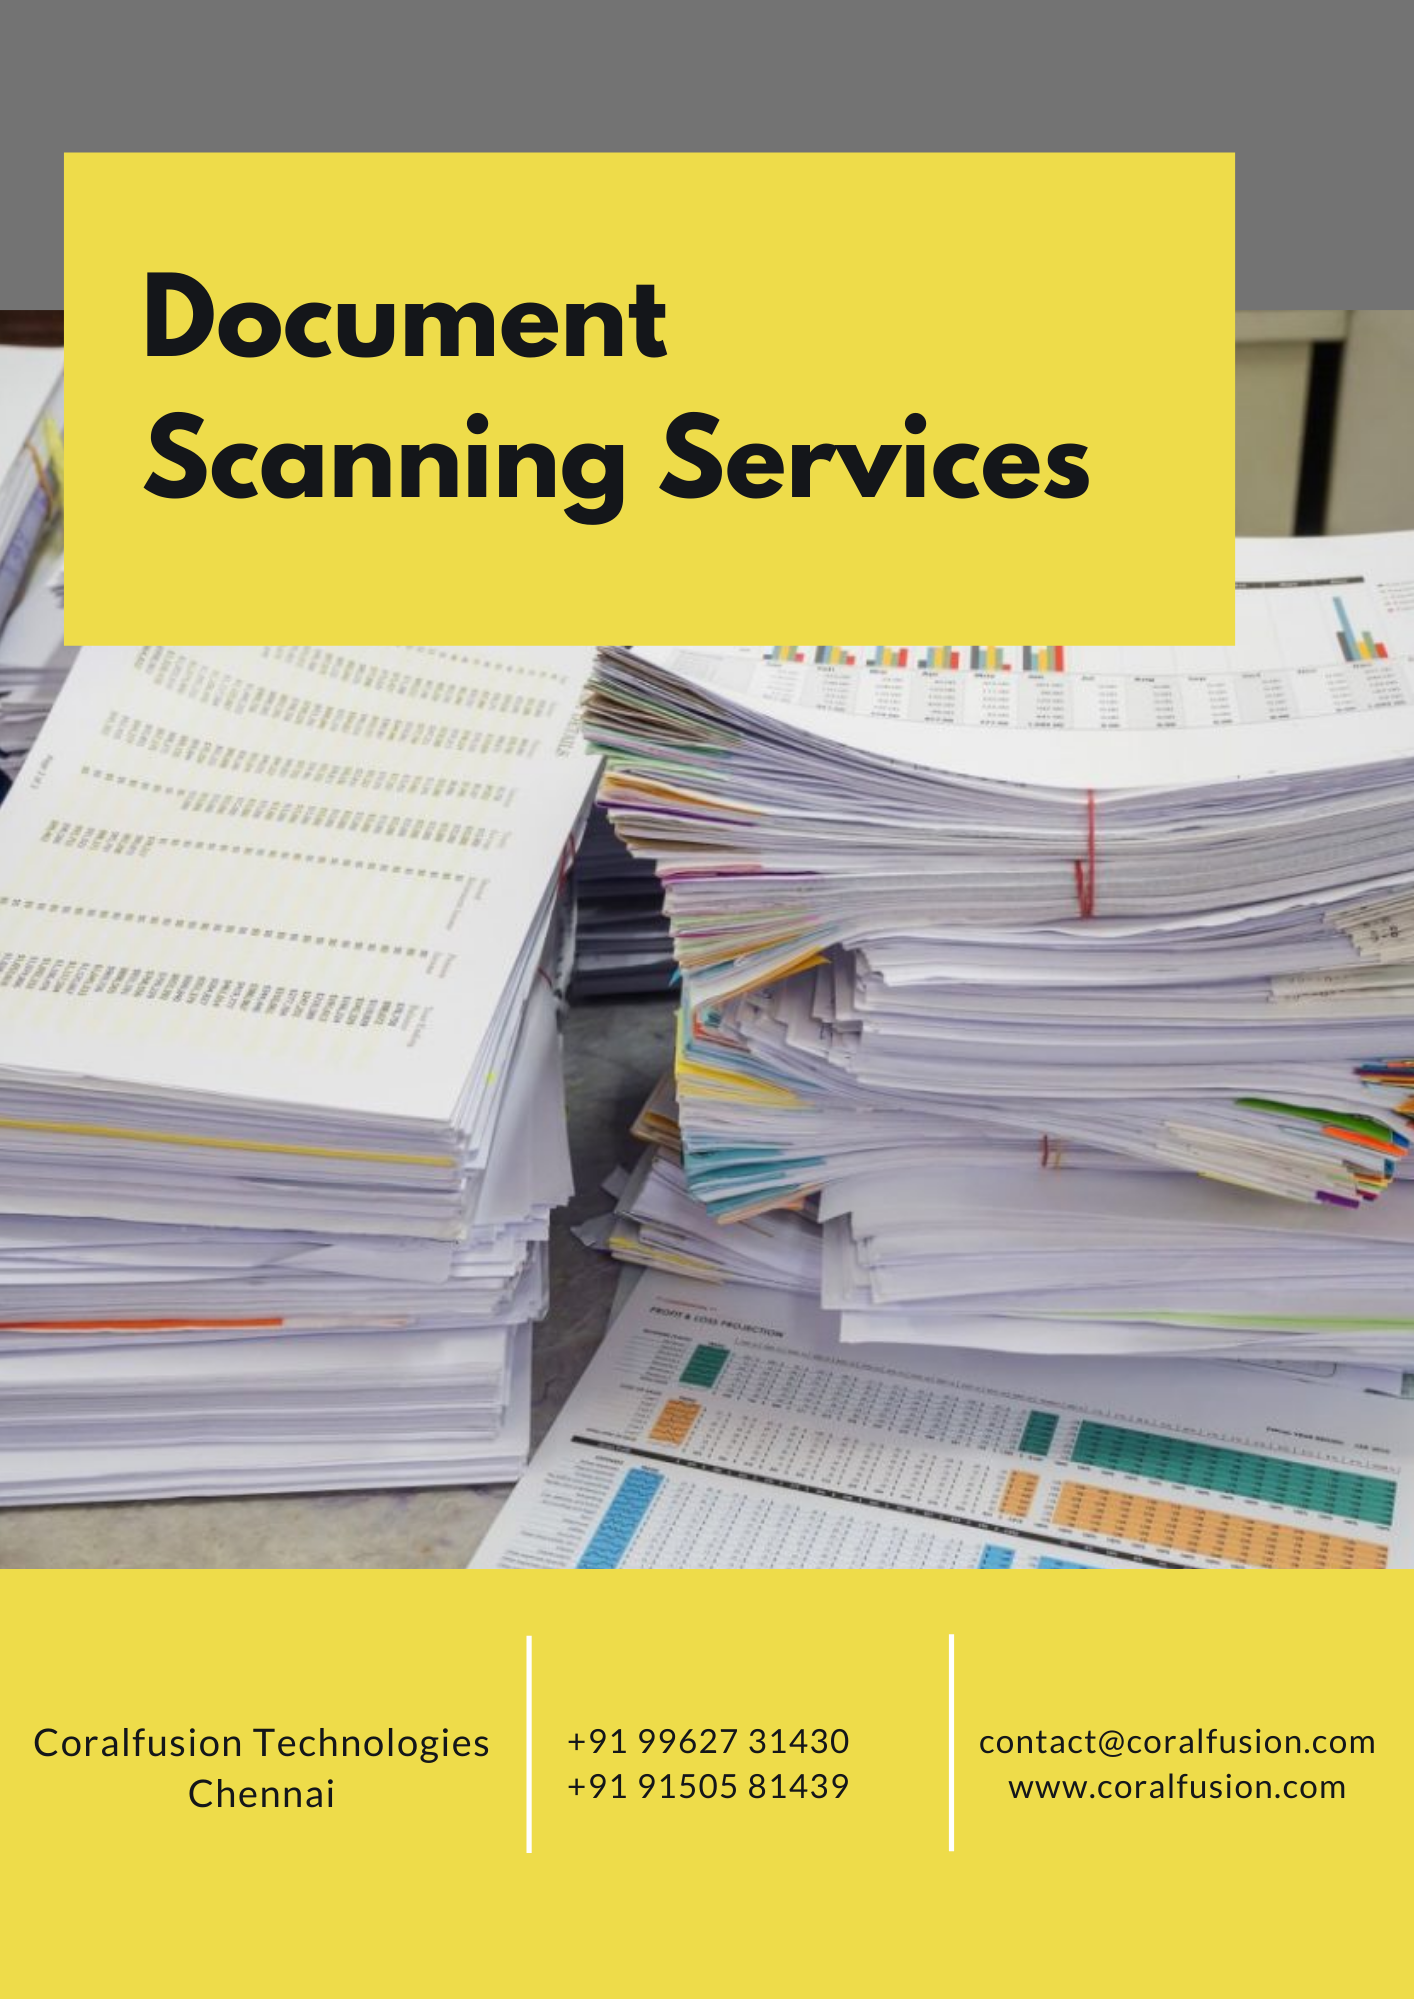 Document scanning and document digitization service in chennai